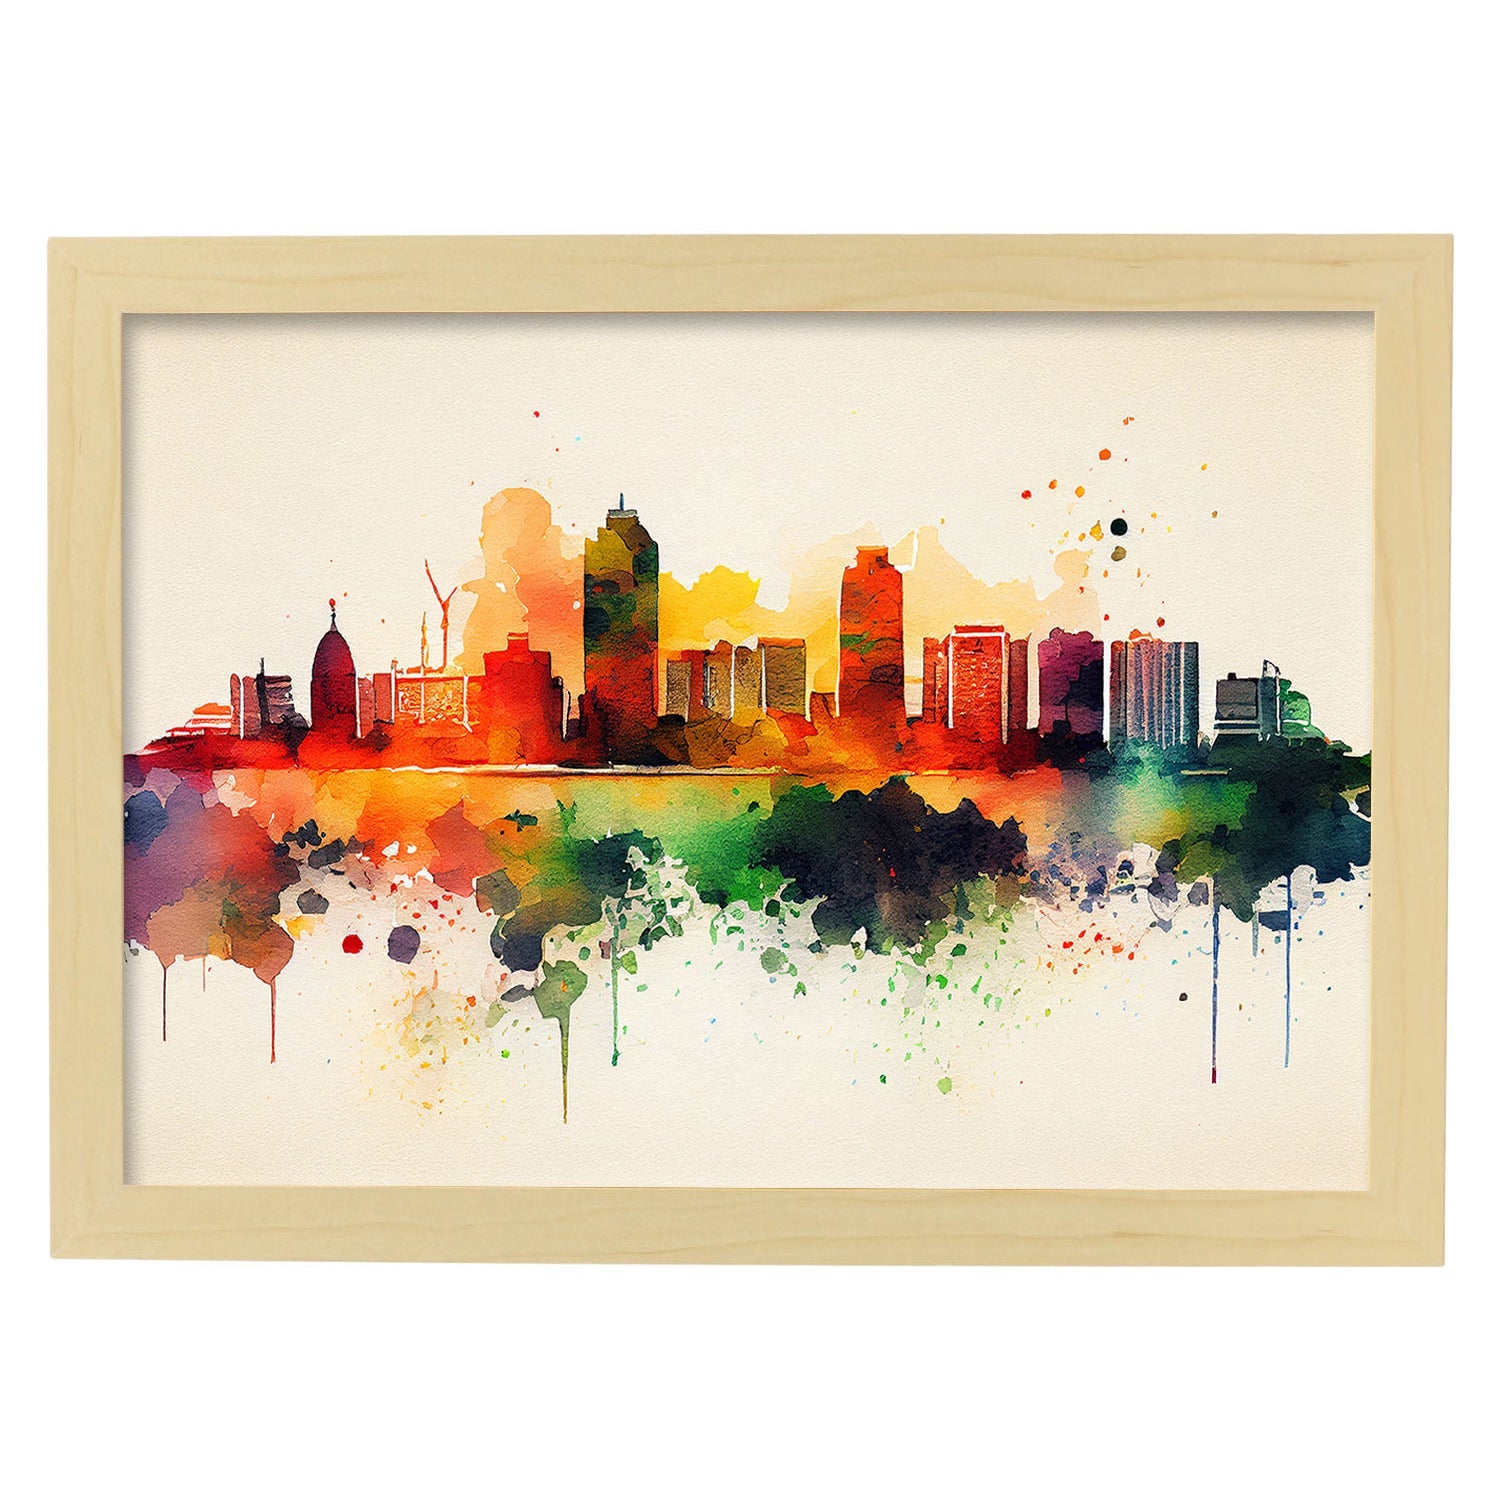 Nacnic watercolor of a skyline of the city of Luanda. Aesthetic Wall Art Prints for Bedroom or Living Room Design.-Artwork-Nacnic-A4-Marco Madera Clara-Nacnic Estudio SL